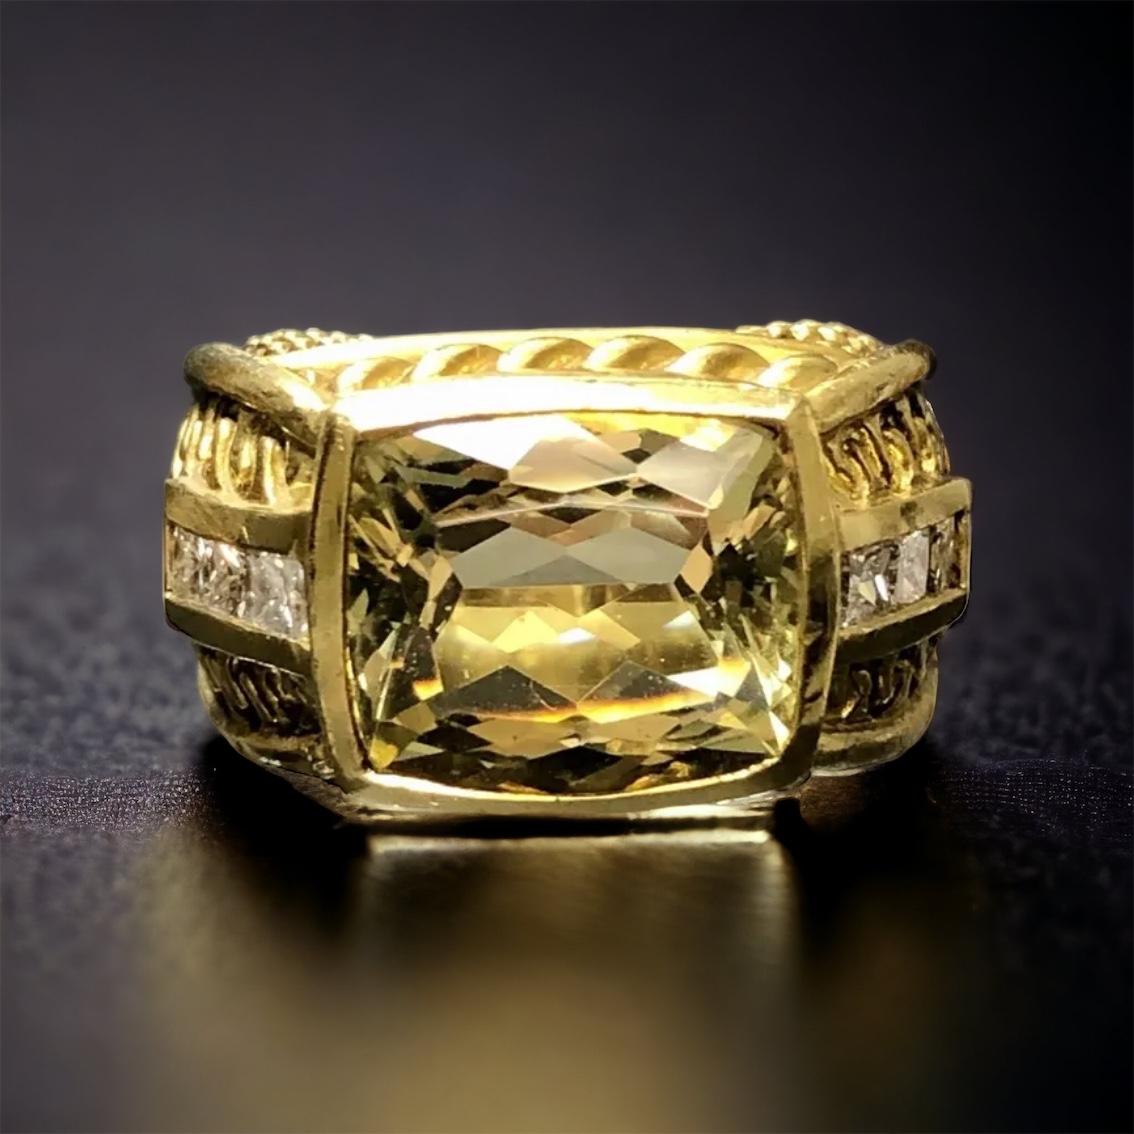 A beautiful and heavy ring done in 18K deep yellow gold by famed designer Judith Ripka. It is centered by a natural lemon quartz measuring 12.30mm x 10.60mm x 6.65mm. Flanking the center stone are 6 princess cut diamonds being G-I in color and Vs1-2